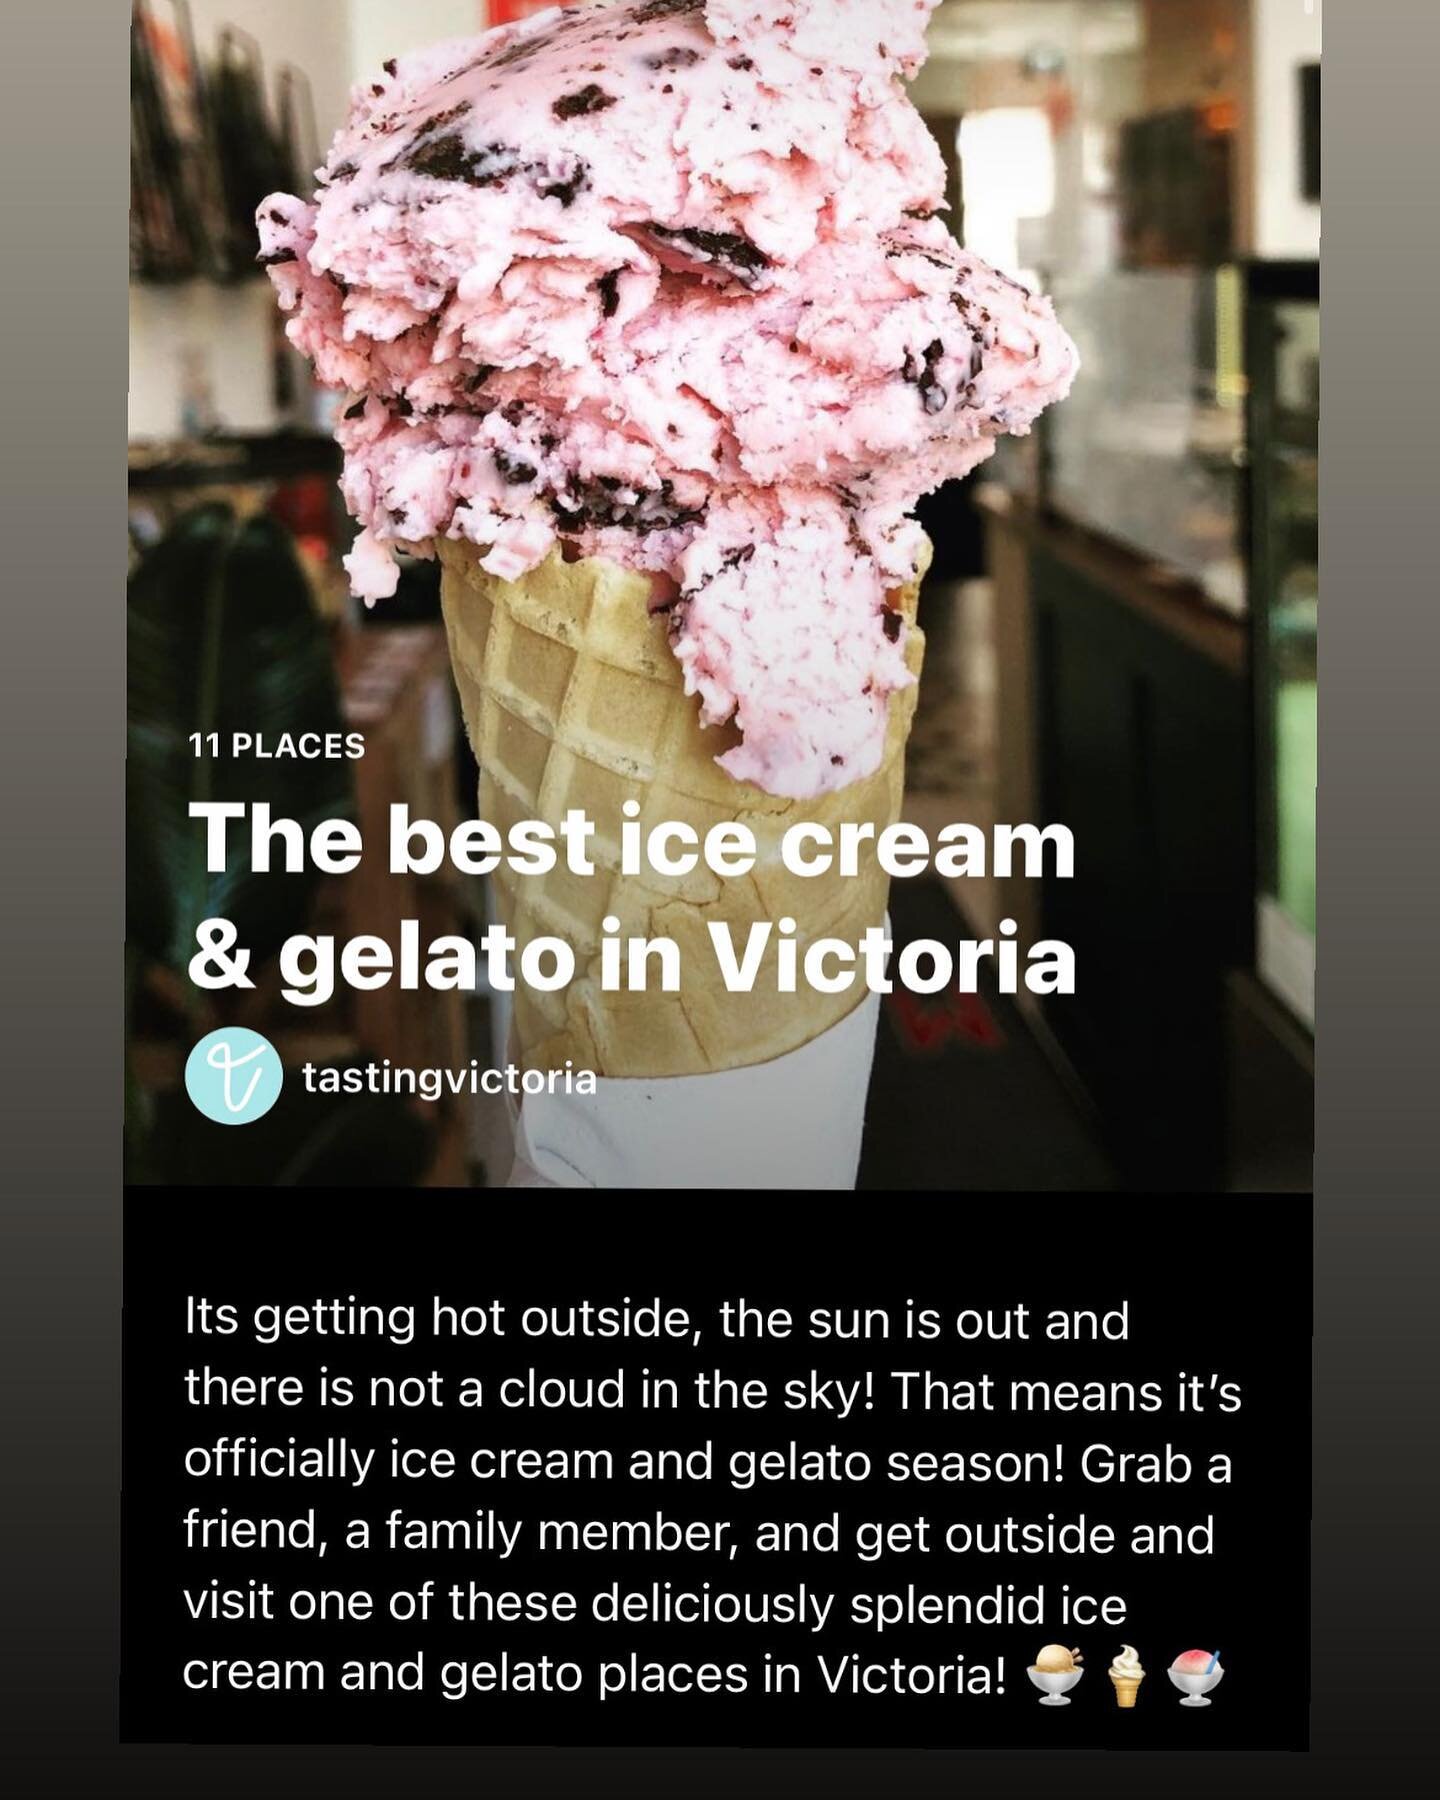 ✨Thank You✨
It was a delightful surprise to see that our gelato was featured as one of the to go spots in Victoria, BC. We will have yummy flavours and new additions this week!! See you soon! 
Show this post to Tracy, Tino or Leila to get 10% your ge